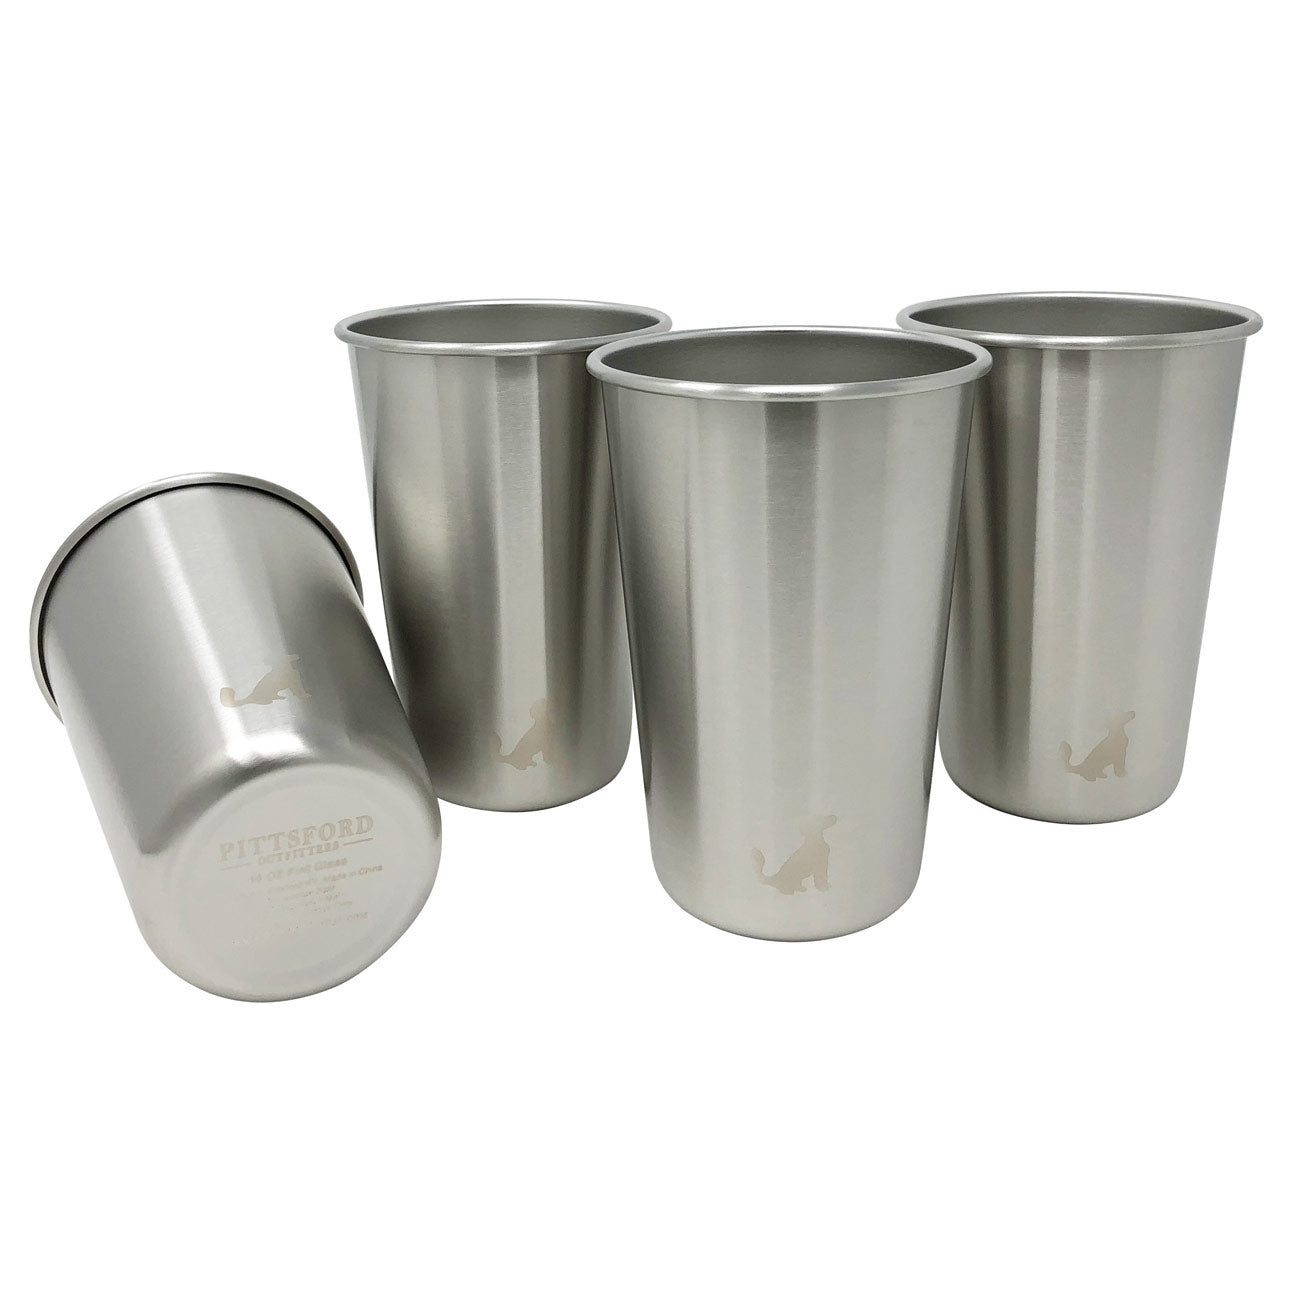 16oz Single Wall Stainless Steel Cups / Pint Glasses, set of 4 - Pittsford  Outfitters